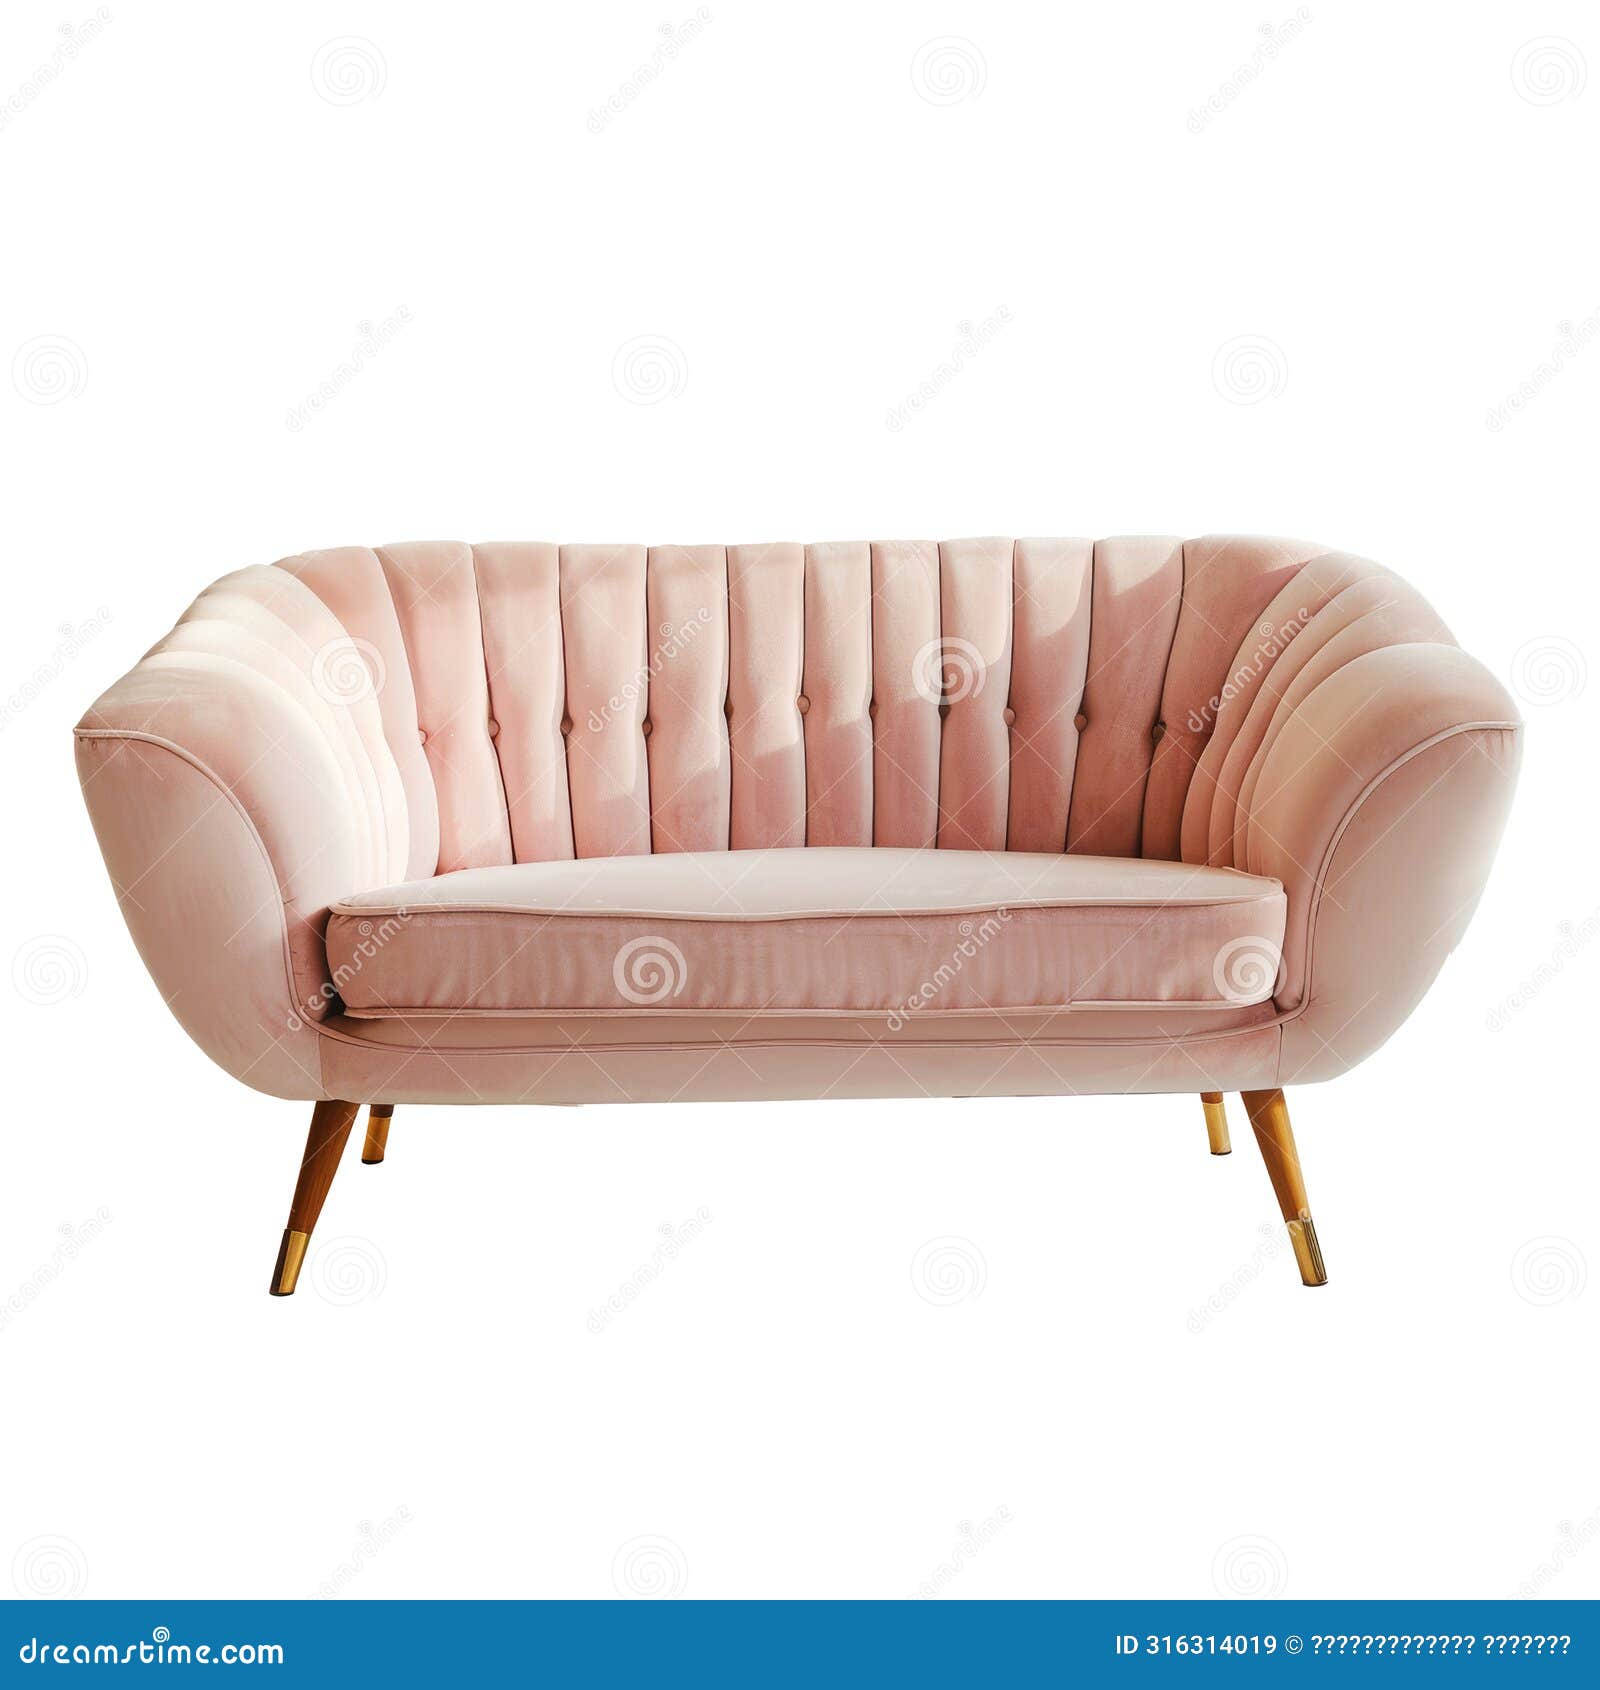 vintage velour soft pink sofa with wooden legs 70s style on the white background